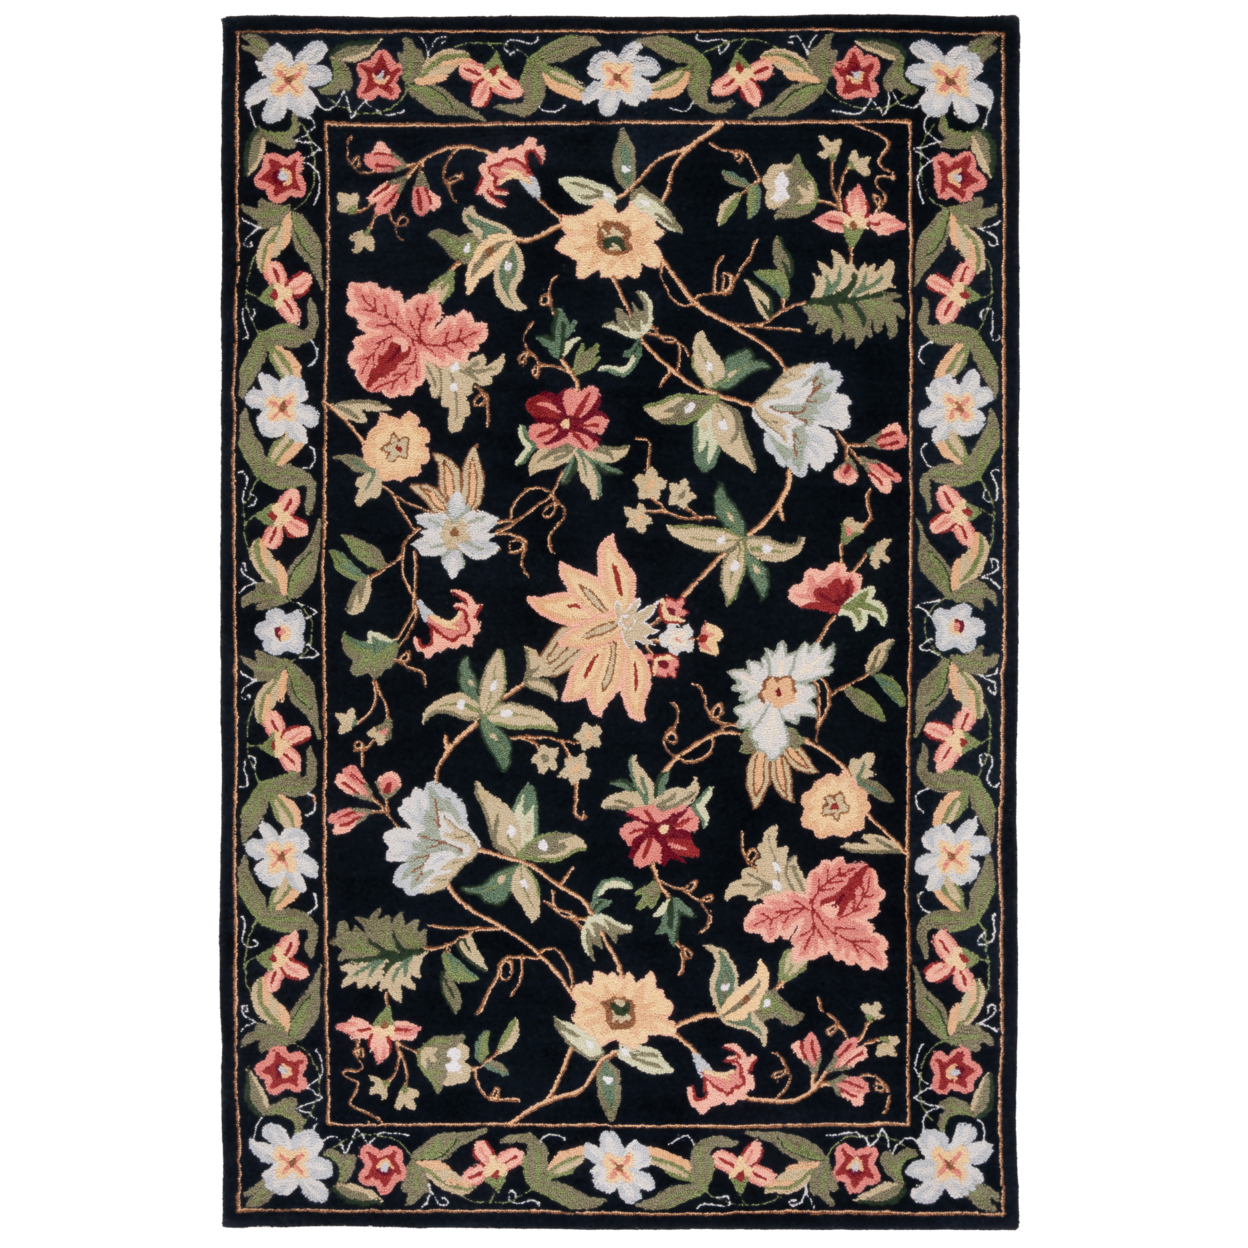 SAFAVIEH Chelsea Collection HK311A Hand-hooked Black Rug - 7' Square